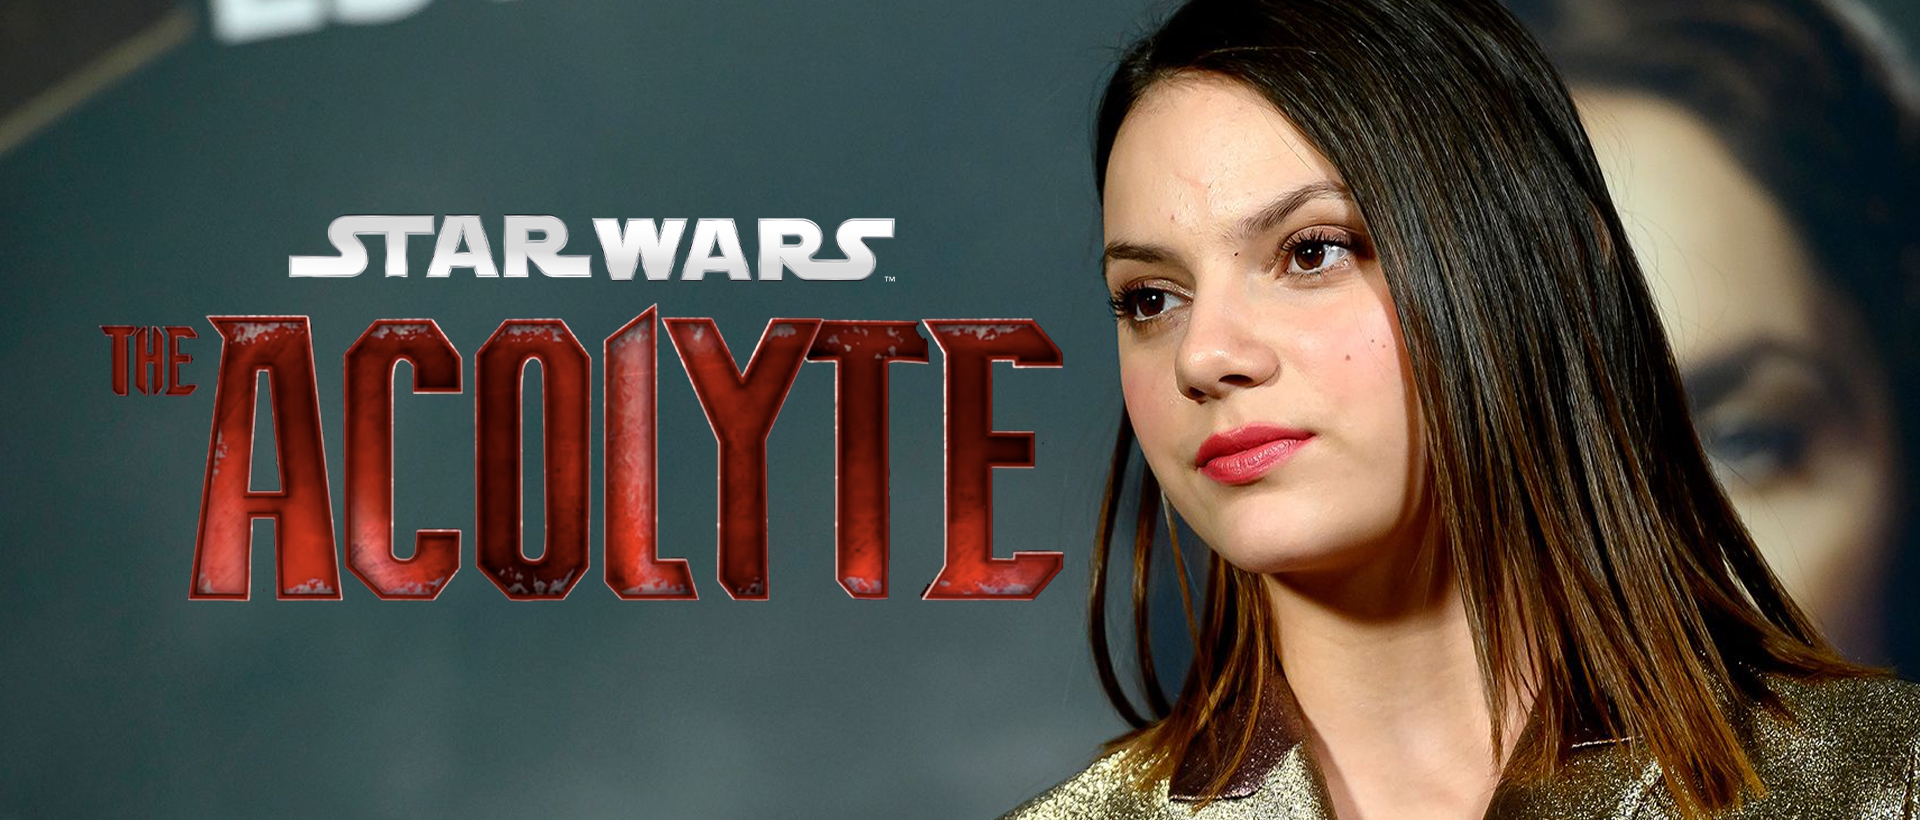 His Dark Materials star Dafne Keen is rumored to have been cast in The Acolyte.